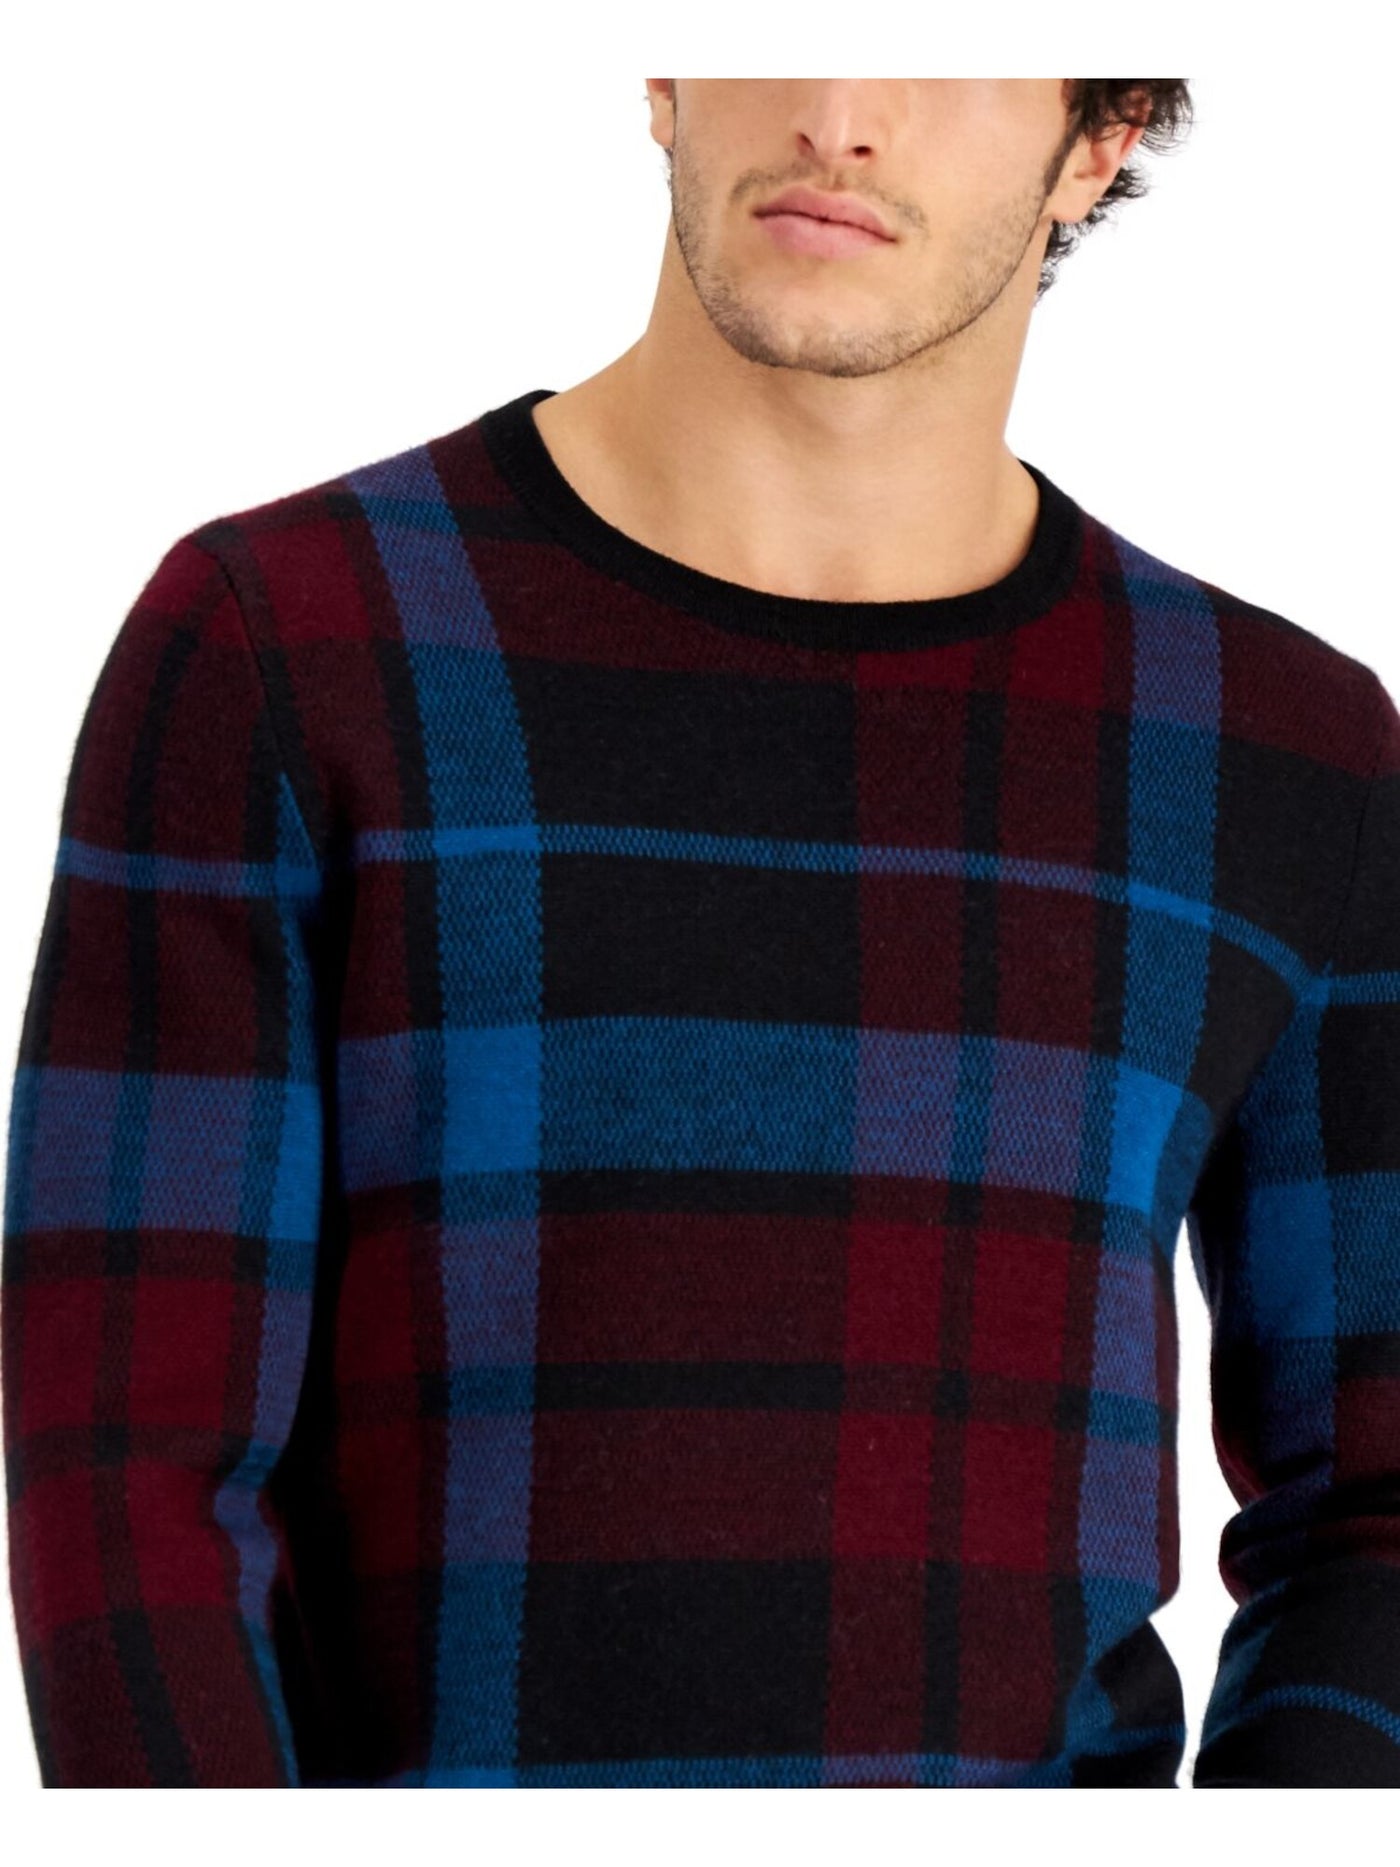 CLUBROOM Mens Expo Red Plaid Long Sleeve Crew Neck Merino Blend Pullover Sweater S